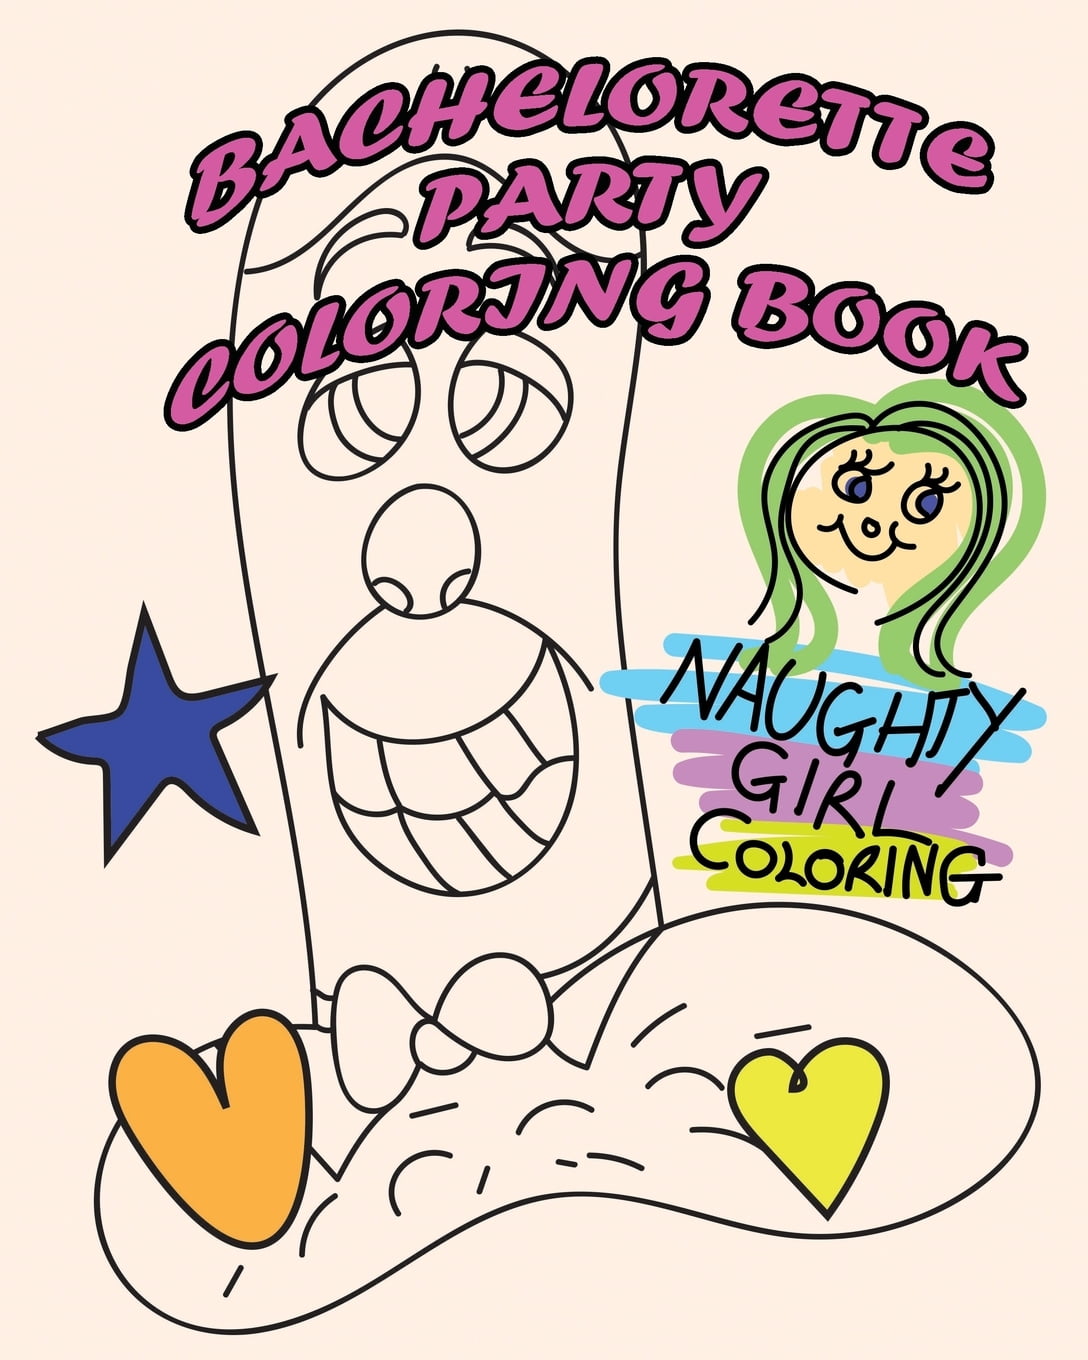 Naughty Girl Coloring: Bachelorette Party Coloring Book : A Funny D*ck Joke  Coloring Book Designed To Make You LOL. (Series #2) (Paperback) -  